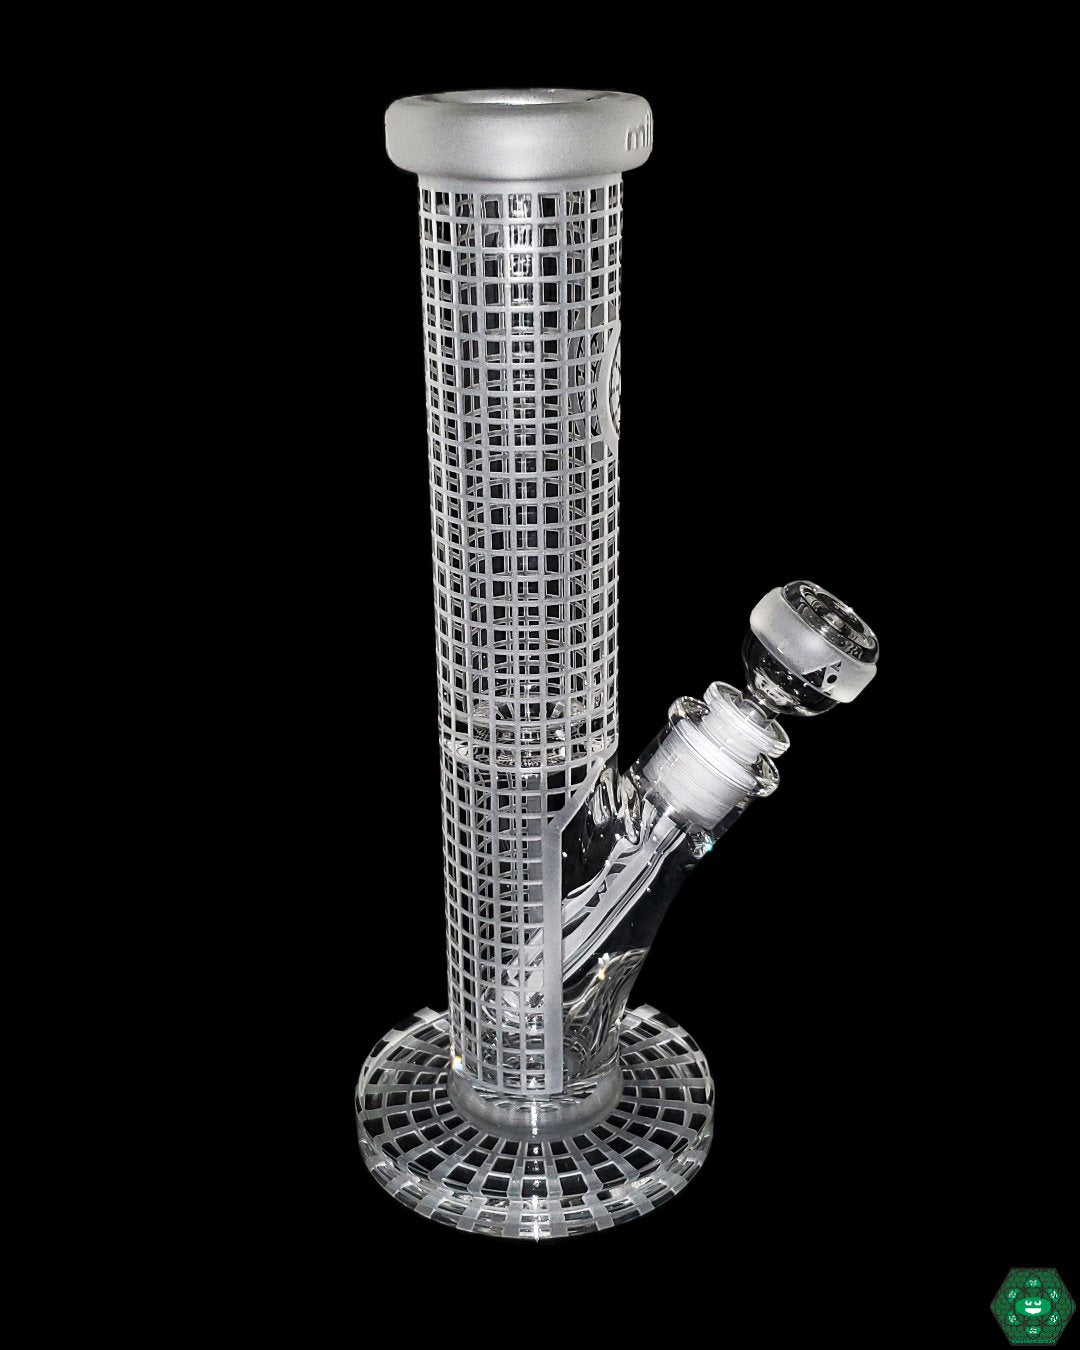 Milkyway Glass - 12" Squared Straight Tube - @Milkywayglass - HG